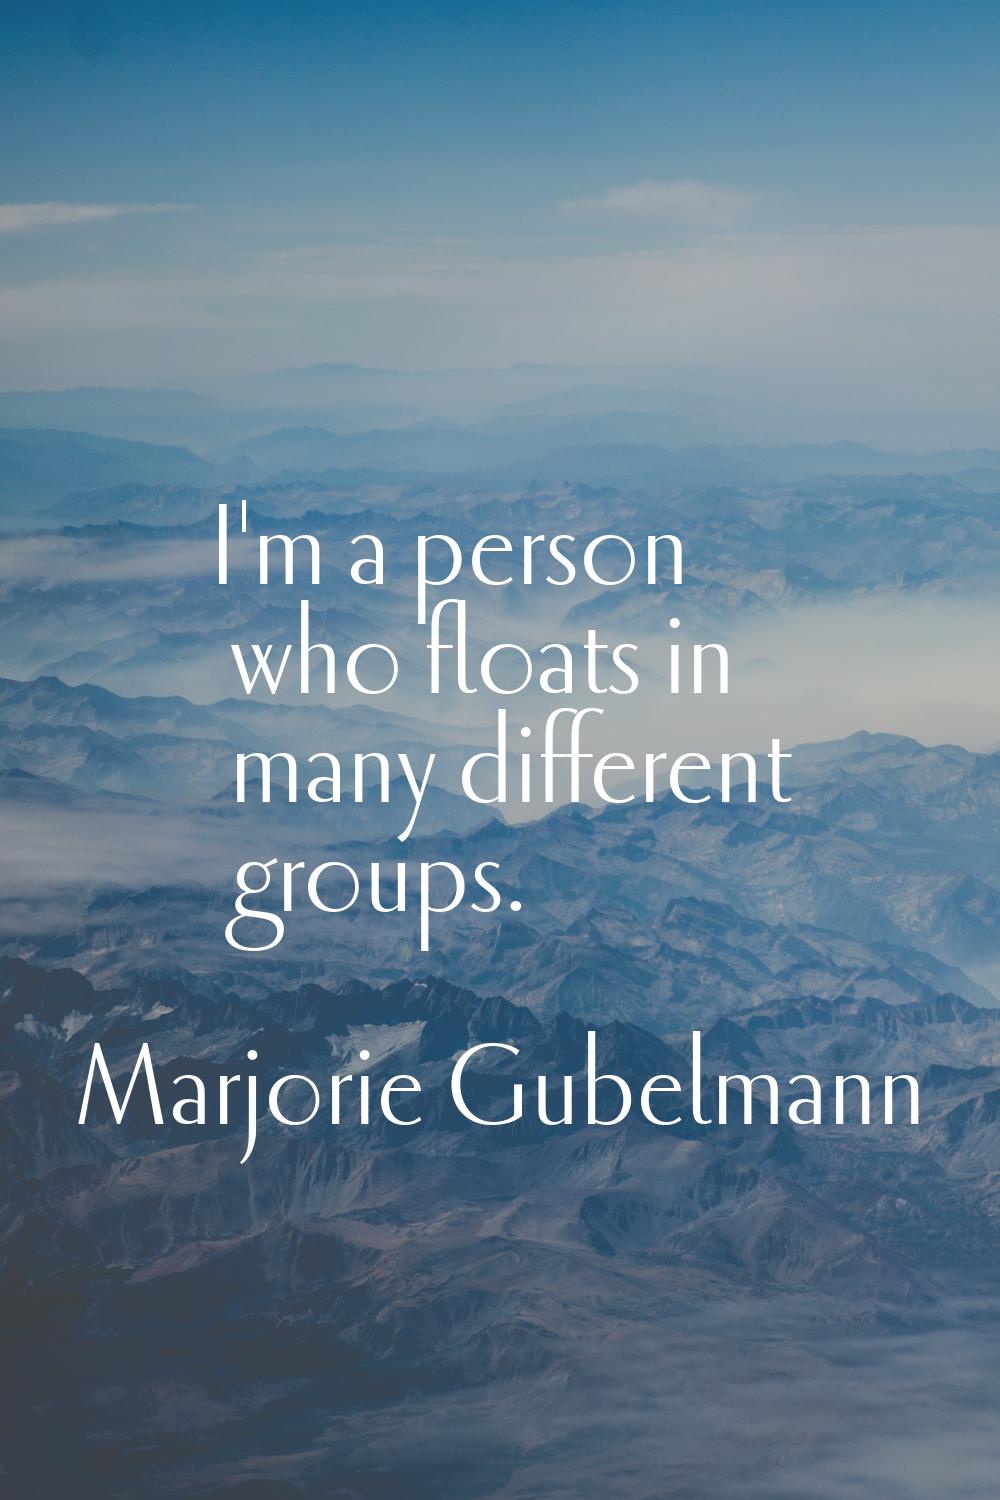 I'm a person who floats in many different groups.